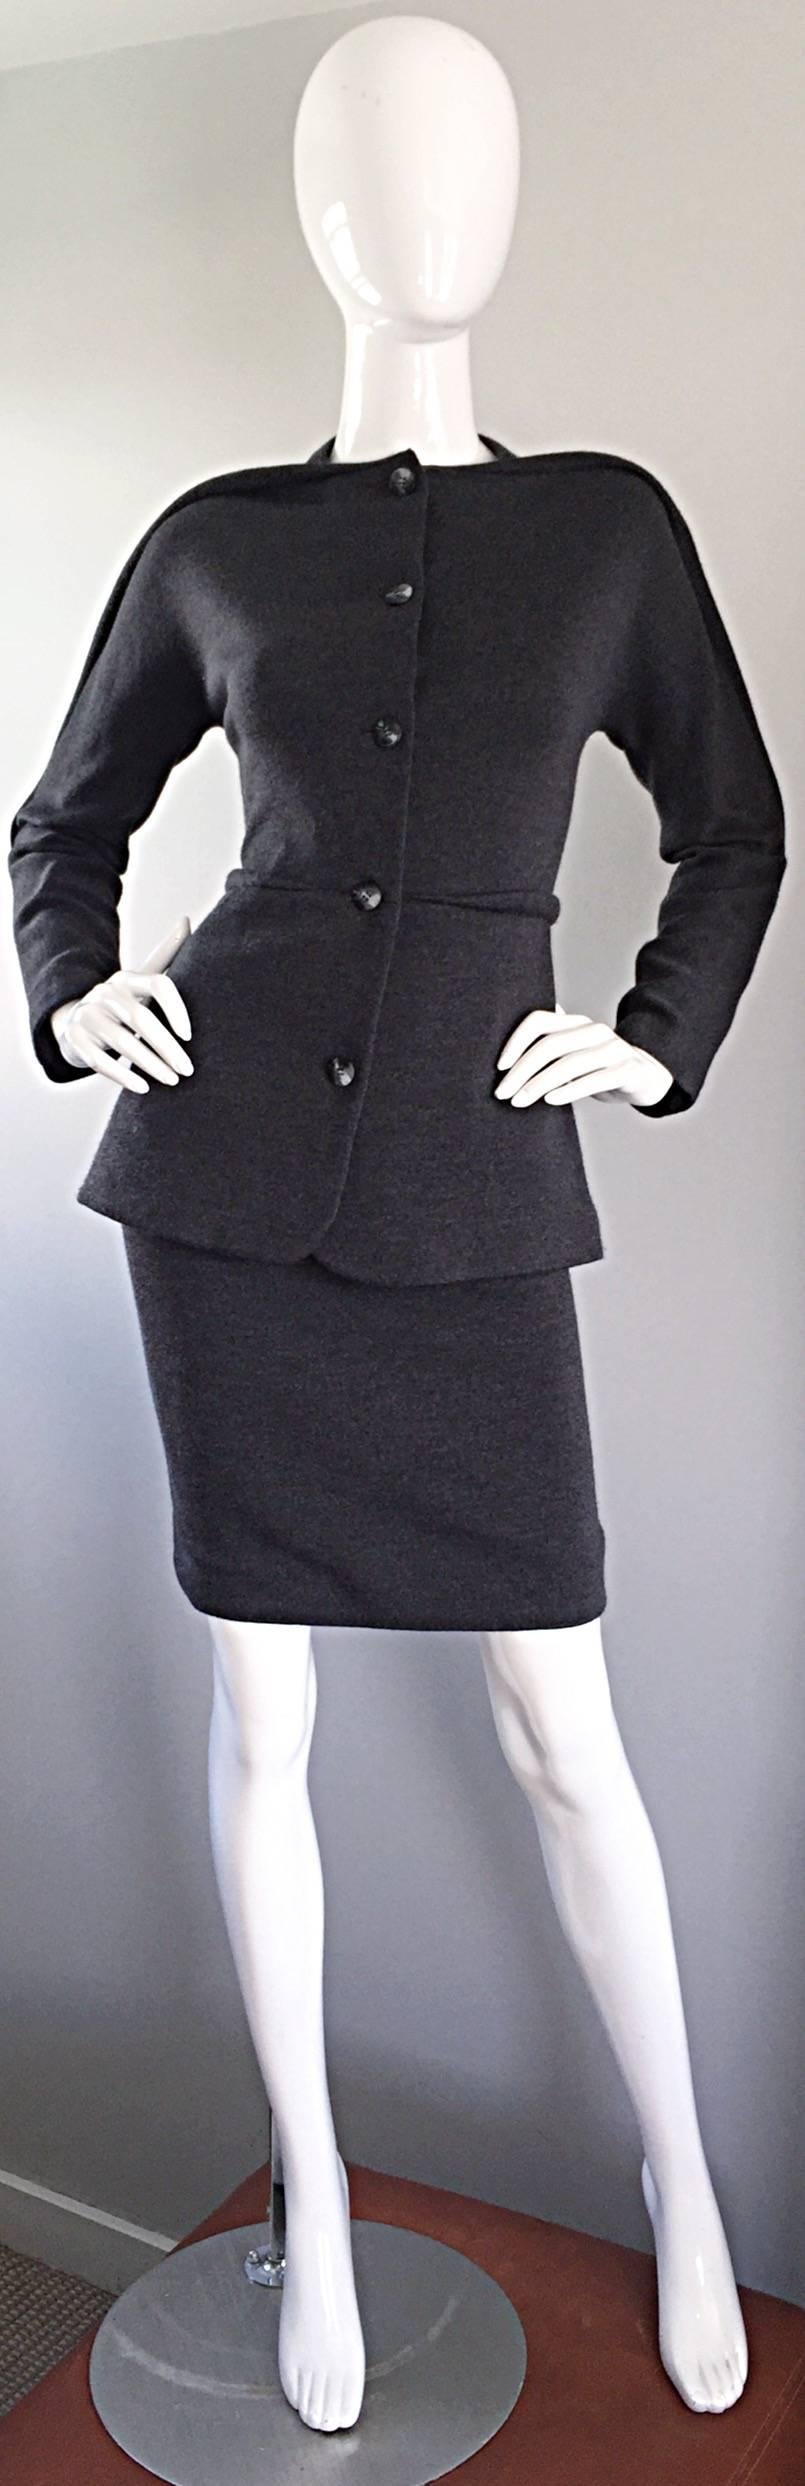 Important vintage 90s GEOFFREY BEENE charcoal grey skirt and jacket suit! Iconic 'piping' along the shoulders of the blazer, and at center waist. Buttons up the bodice. High waisted mini skirt. Hidden zipper up th eback with hook-and-eye closure.